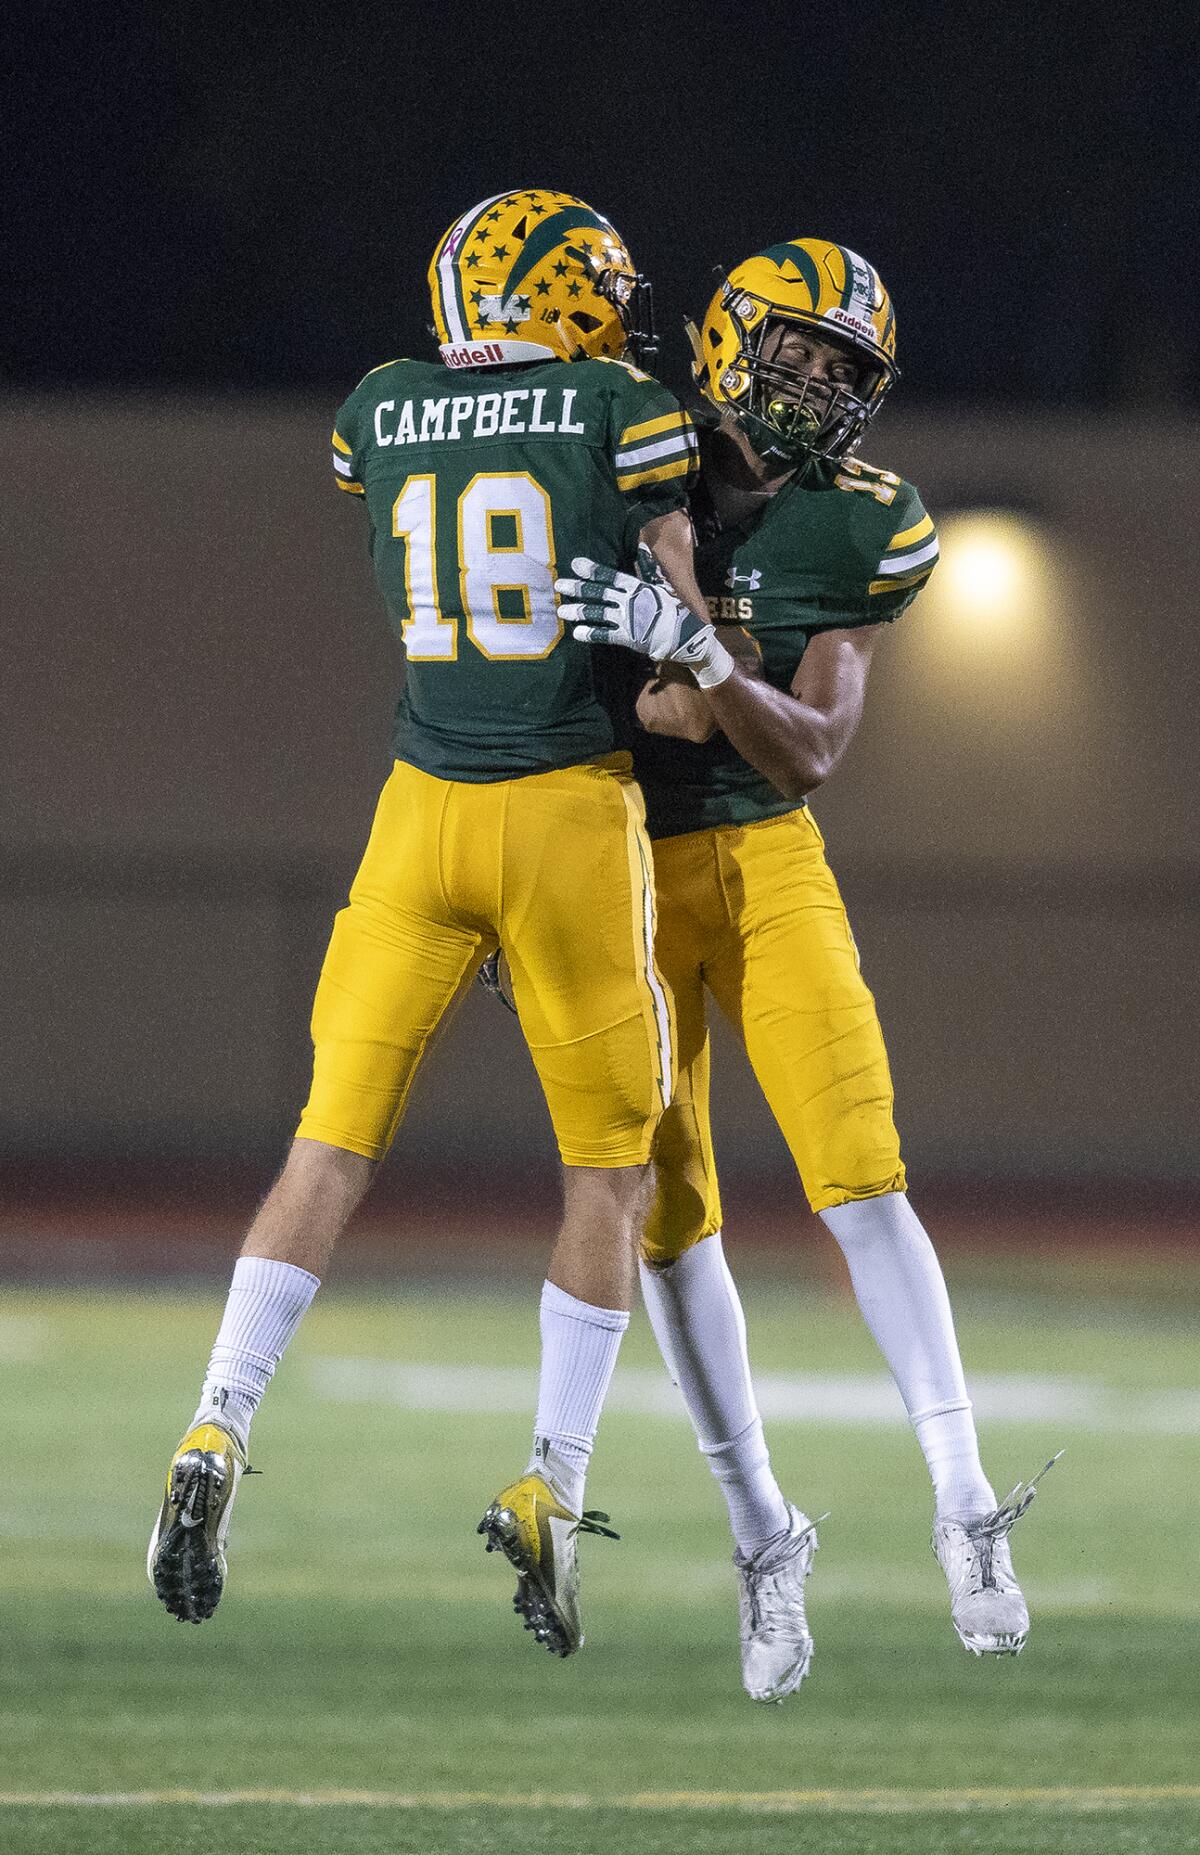 Edison's PJ Campbell, left, and Cole Koffler celebrate after beating Heritage 42-27 in the first round of the CIF Southern Section Division 3 playoffs at Huntington Beach High on Nov. 8.